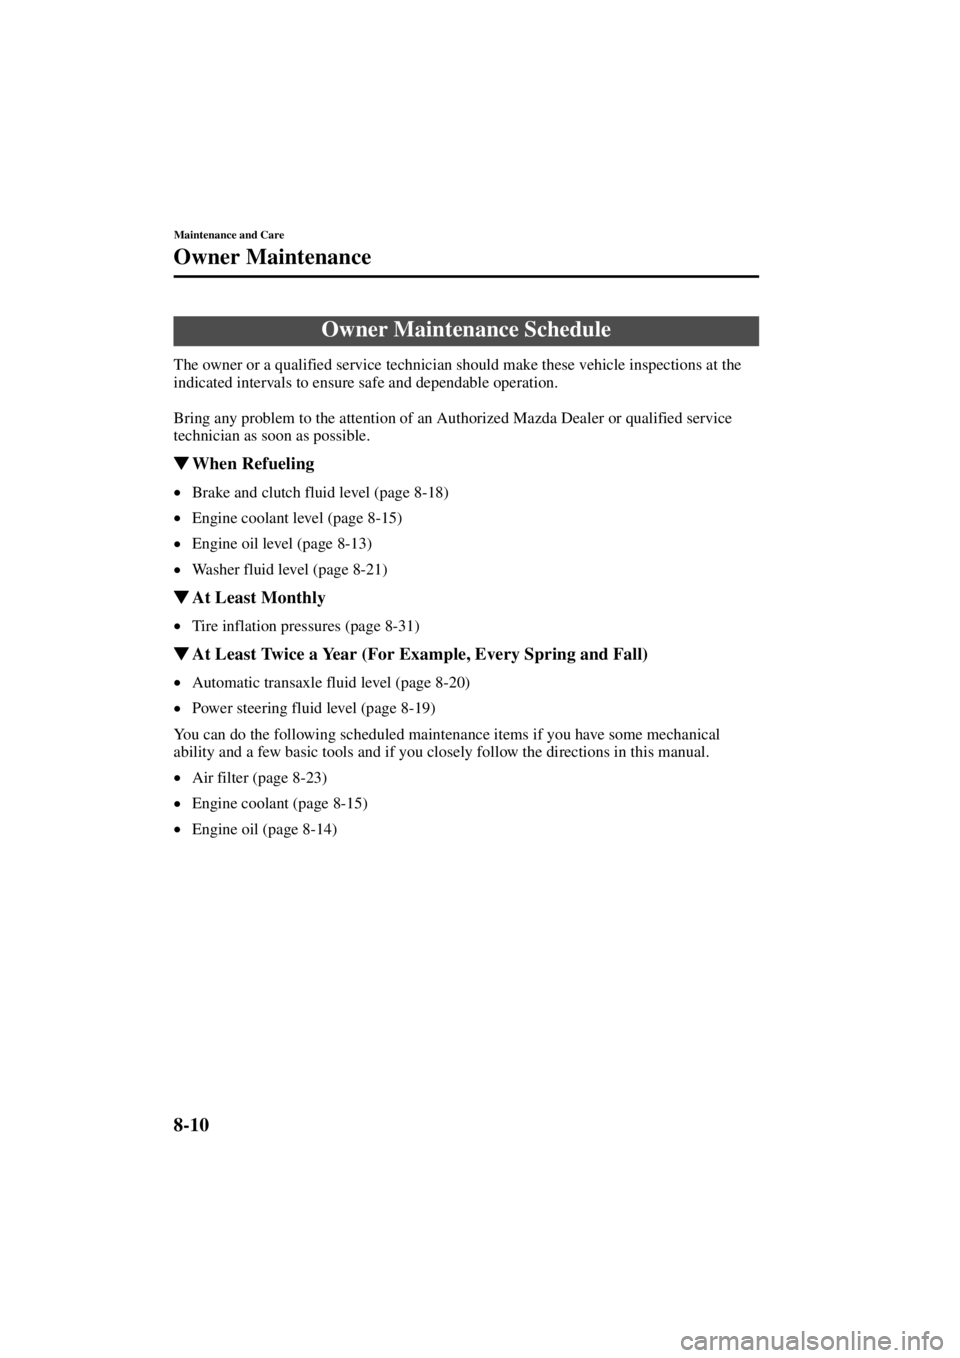 MAZDA MODEL 3 5-DOOR 2004 User Guide 8-10
Maintenance and Care
Form No. 8S18-EA-03I
Owner Maintenance
The owner or a qualified service technician should make these vehicle inspections at the 
indicated intervals to ensure safe and depend